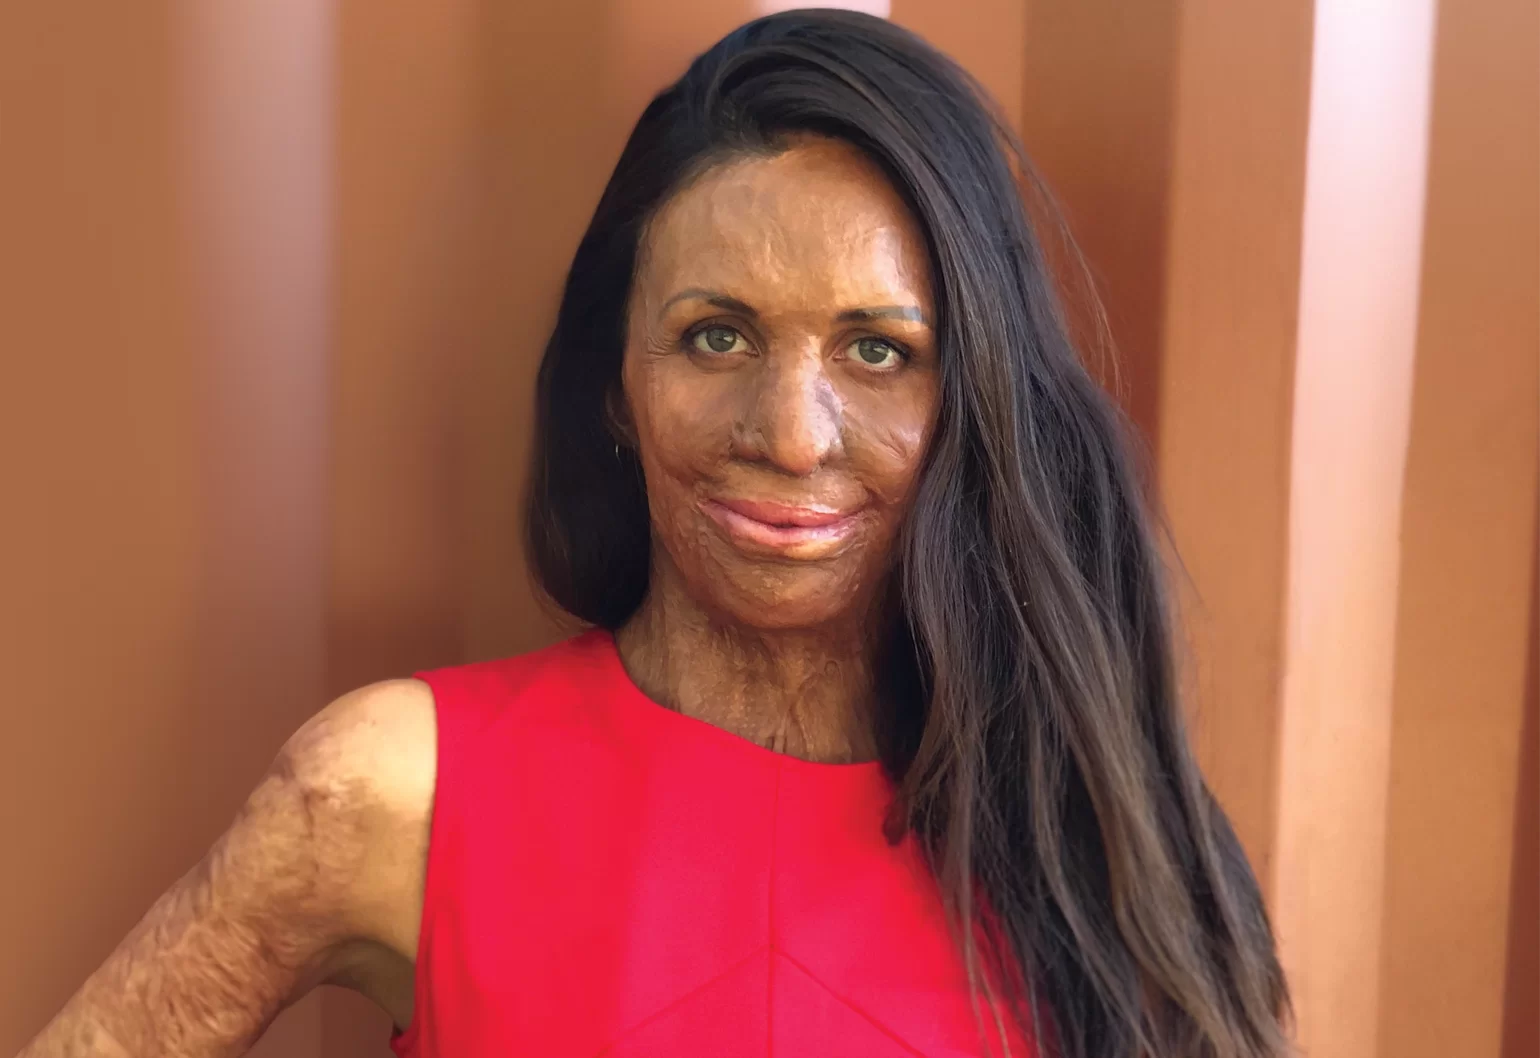 Turia Pitt on the engineering mindset that helped her get through tough